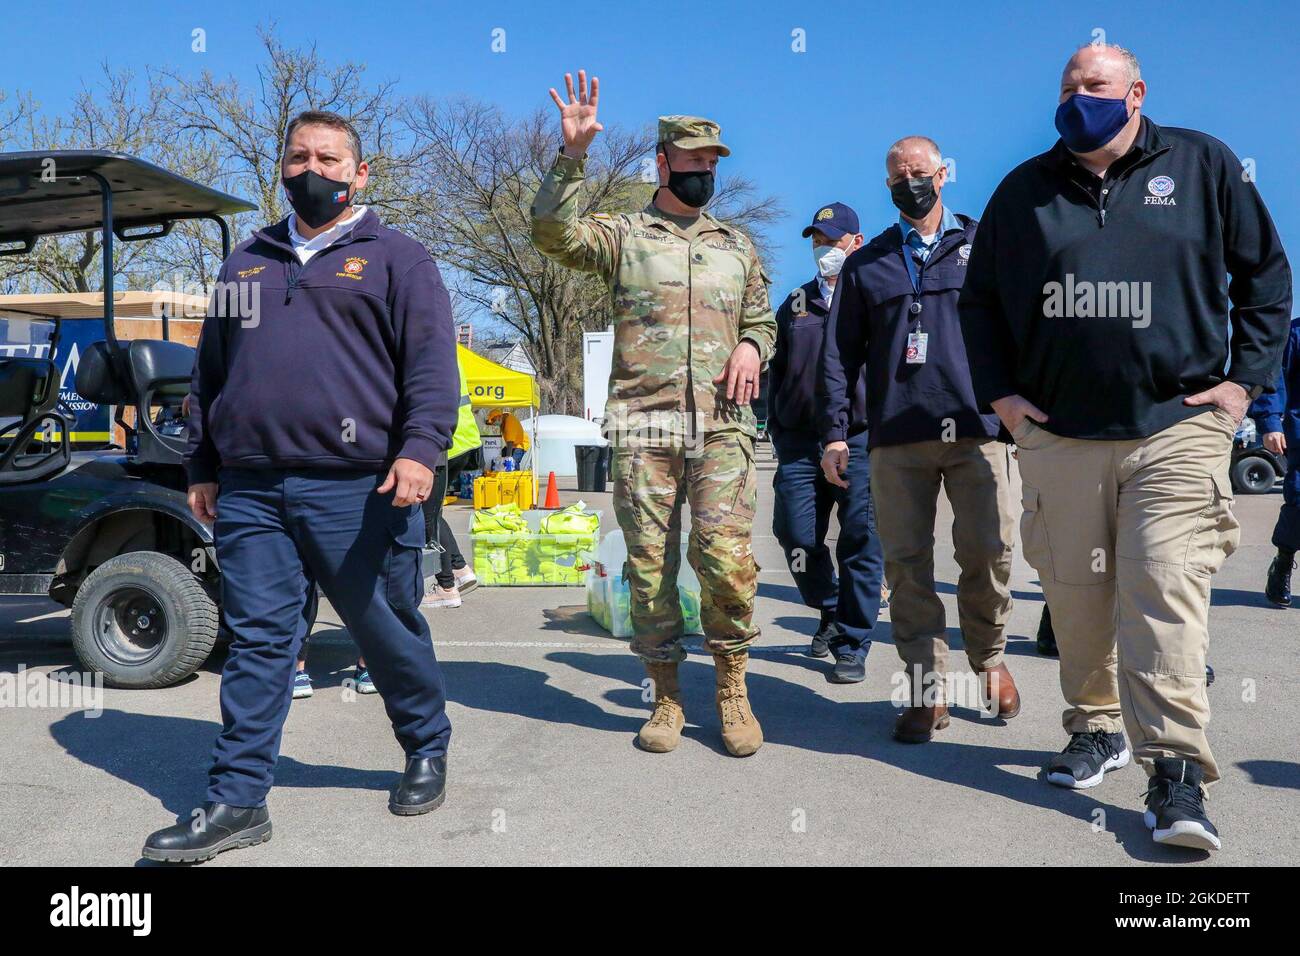 Stephan Lopez Jr. (far left), the section chief of Geospatial Intelligence and Analytics at Dallas Fire-Rescue, and U.S. Army Lt. Col. Nicholas Talbot (center left), 1st Combined Arms Battalion, 63rd Armor Battalion, 2nd Armored Brigade Combat Team, 1st Infantry Division, commander, escort Robert “Bob” Fulton (far right), the Acting Administrator of the Federal Emergency Management Agency (FEMA), on an on-site location tour at the Fair Park Community Vaccination Center (CVC) in Dallas, March 20, 2021. Through a federal validation process, it was determined that U.S. service members could assis Stock Photo